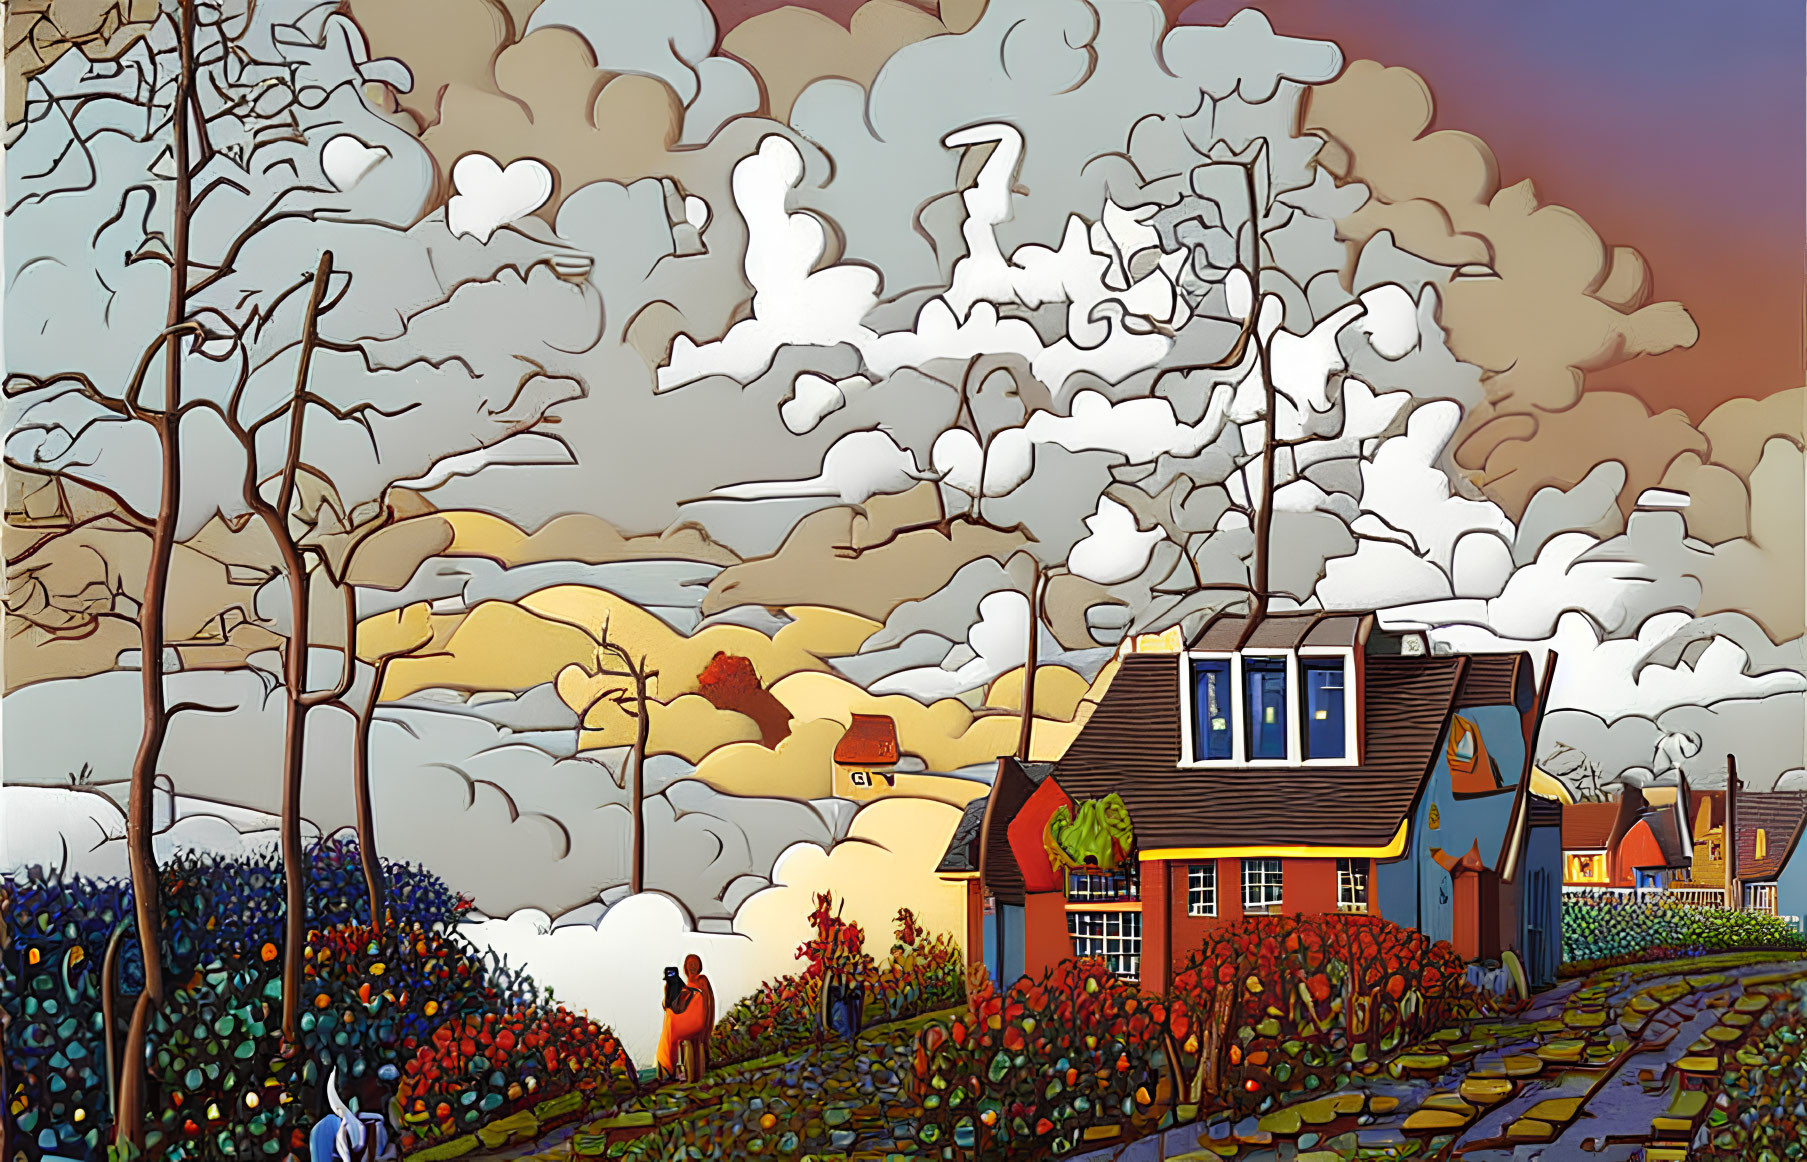 Colorful landscape illustration with vibrant house, leafless trees, dynamic sky, and figure by fence